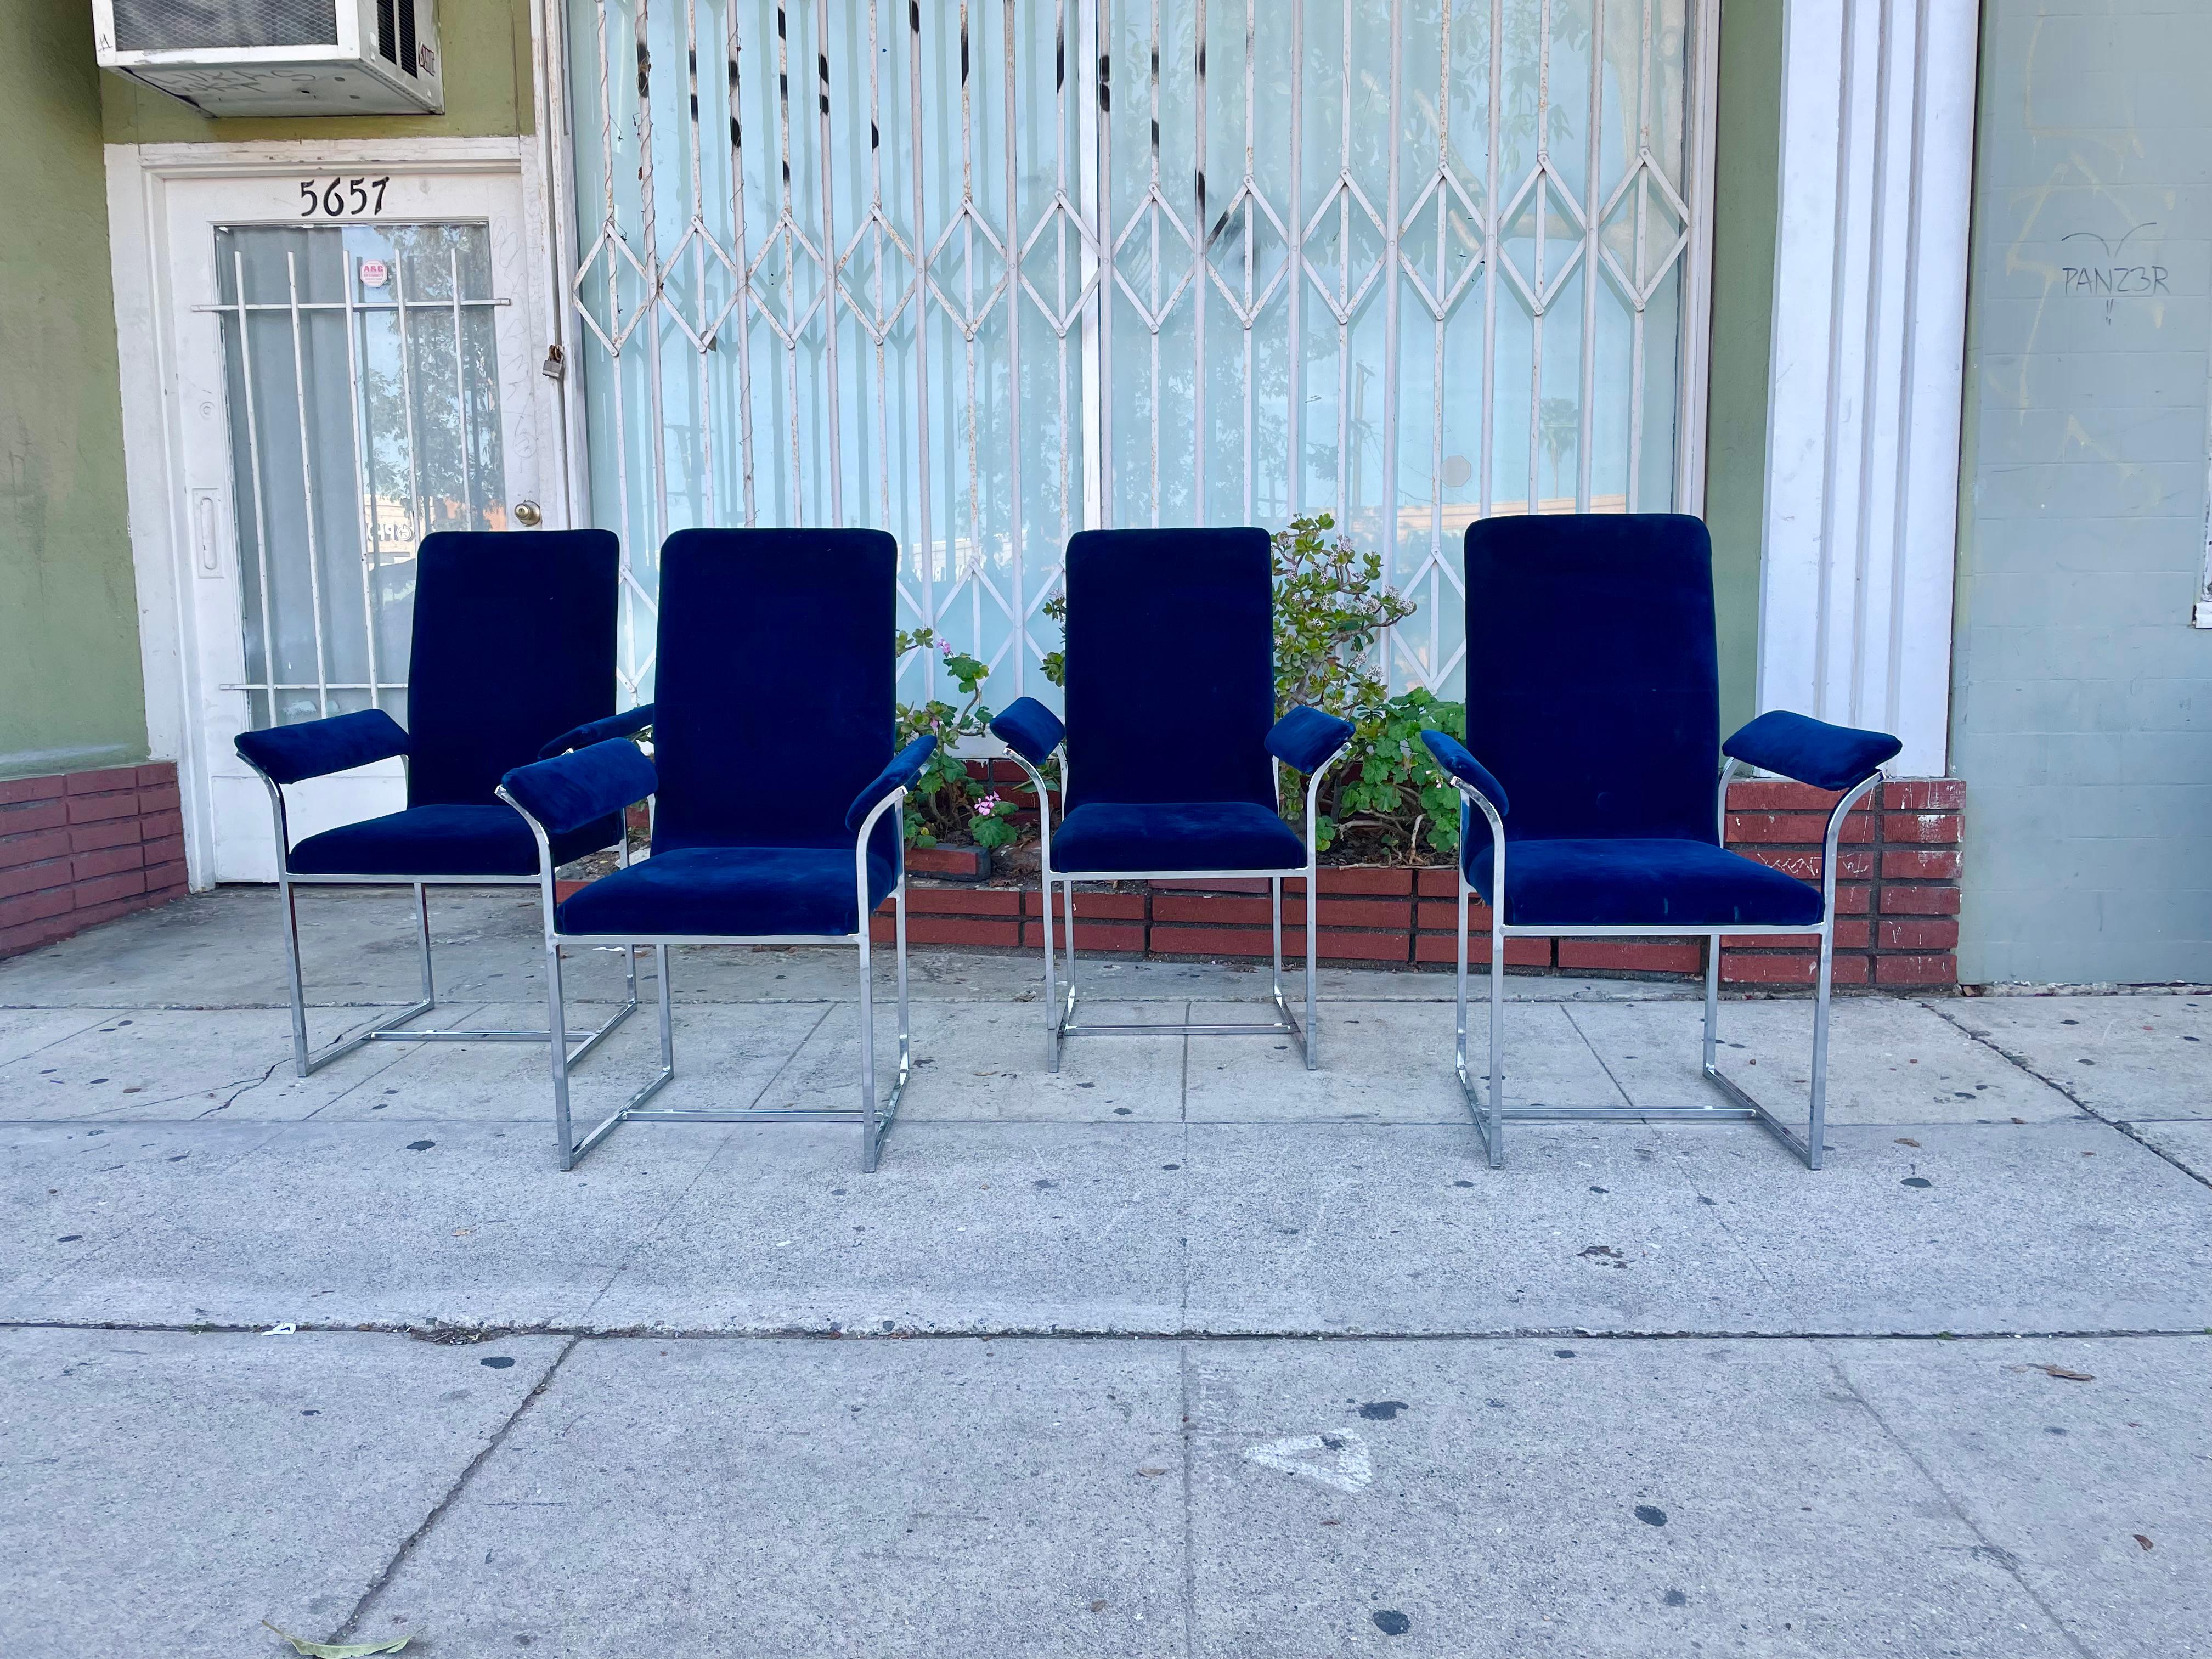 Set of four chrome dining set styled after Milo Baughman, each chair features a chrome base with a unique sculptured armrest and has a blue velvet upholstery making them one of a kind.